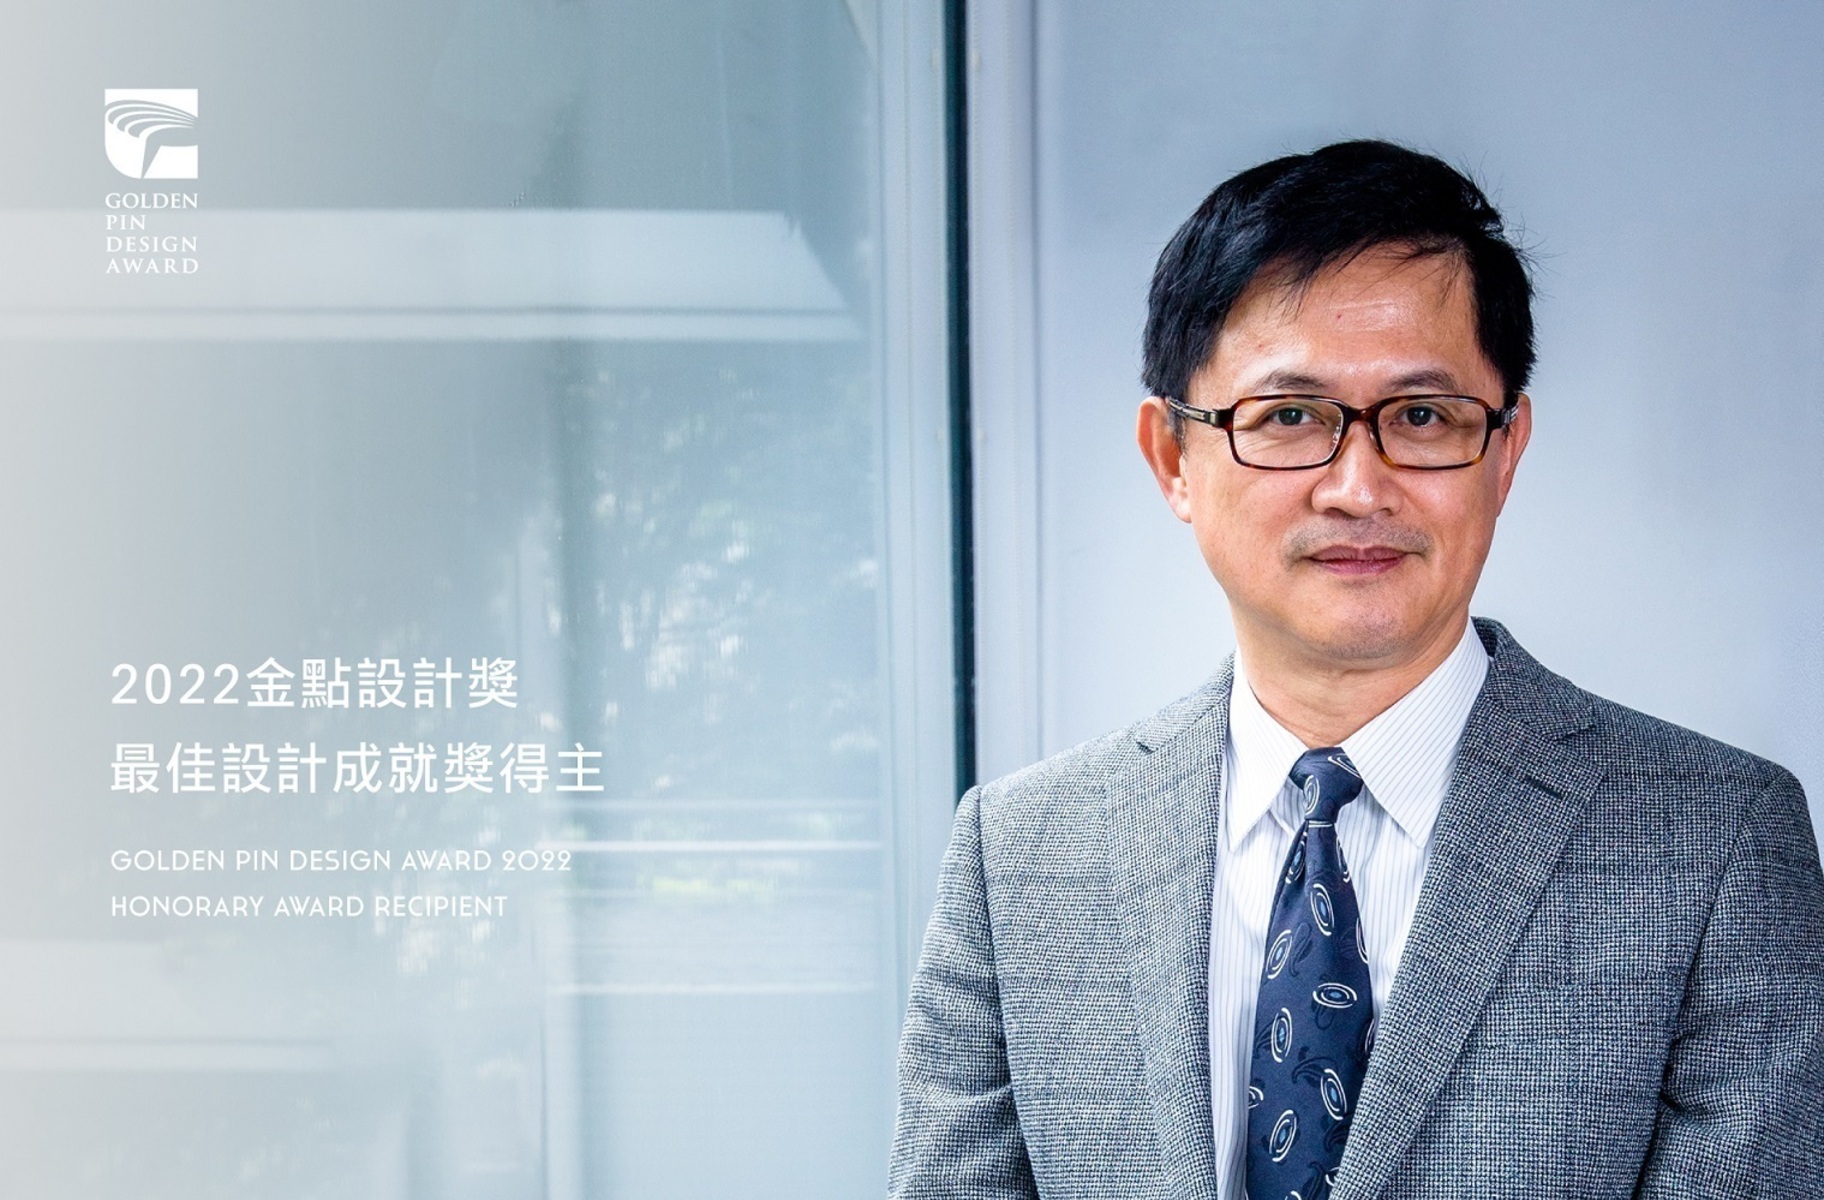 Pegatron Group founder Tung Tzu-Hsien to Receive Honorary Award at the 2022 Golden Pin Design Awards